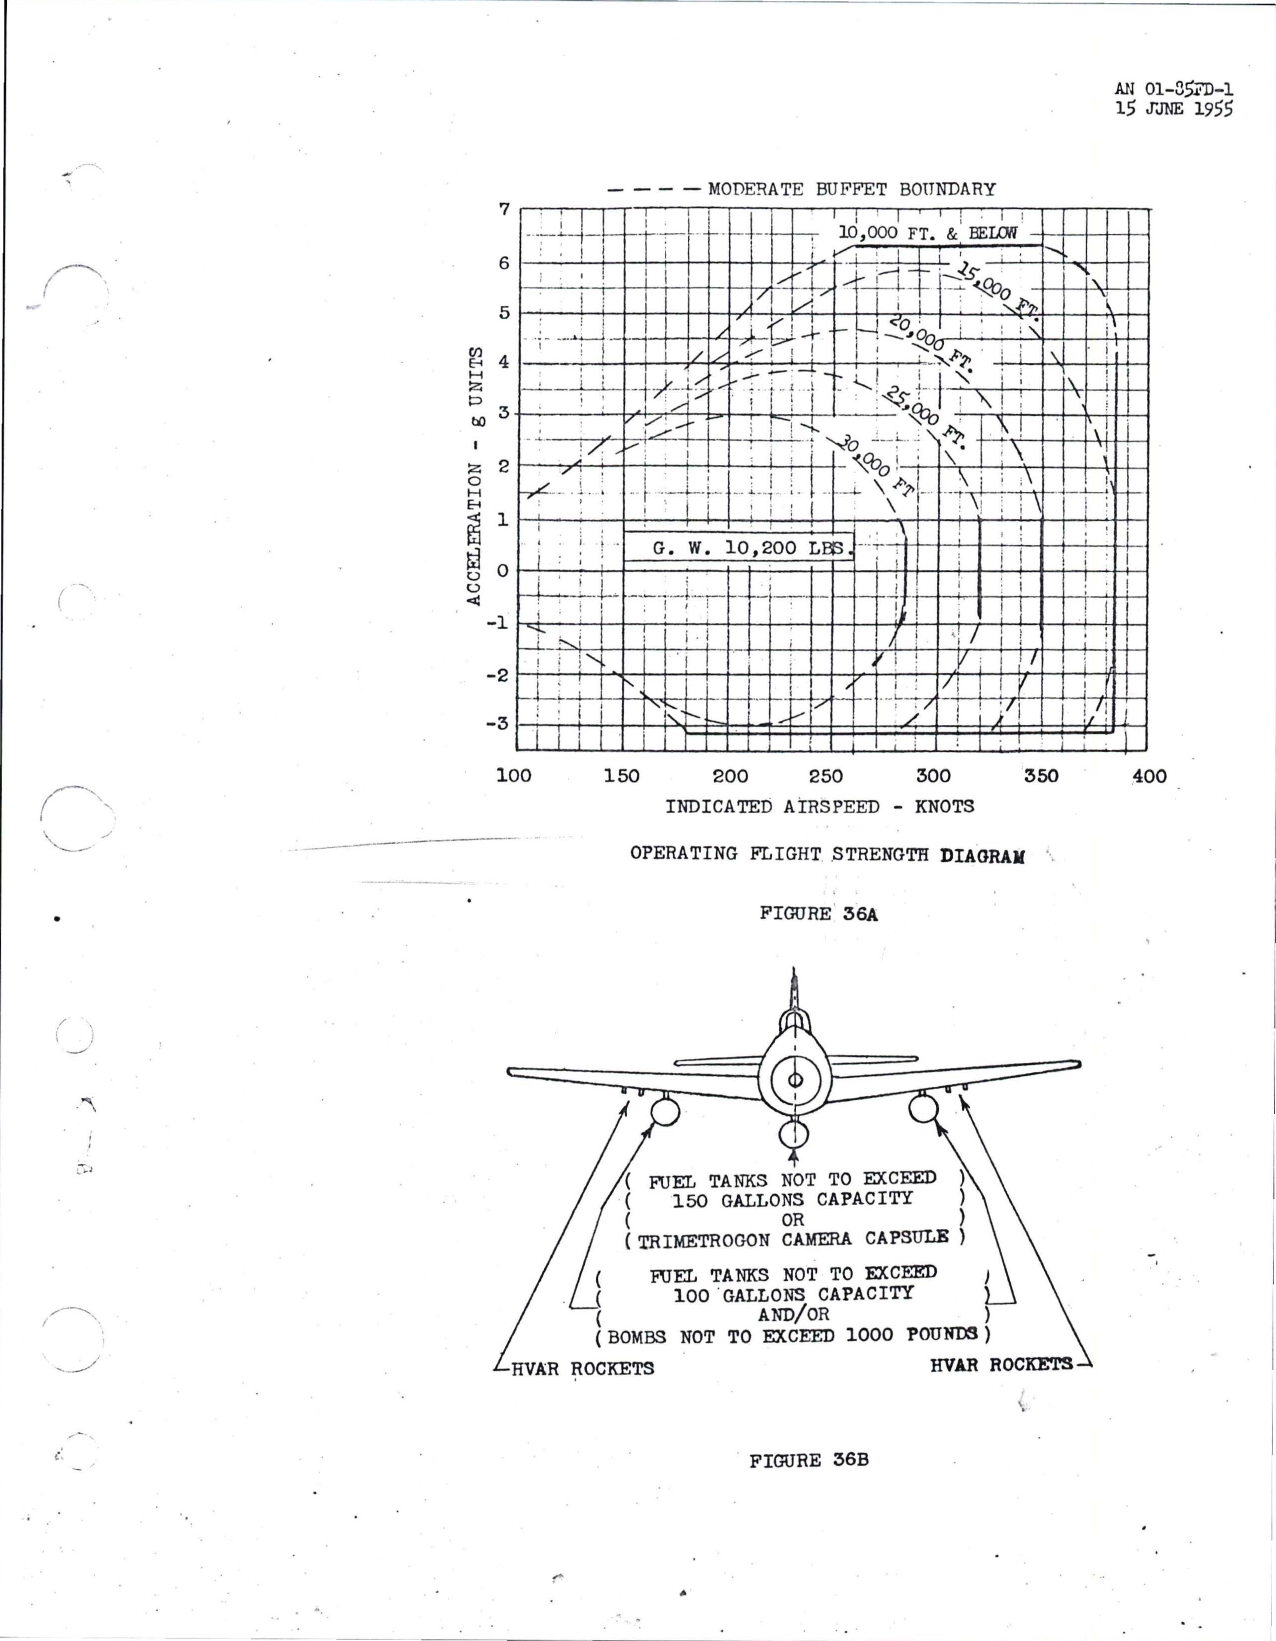 Sample page 5 from AirCorps Library document: Flight Handbook Interim Revision No. 1 for F8F-1, F8F-1N, F8F-2, F8F-2D